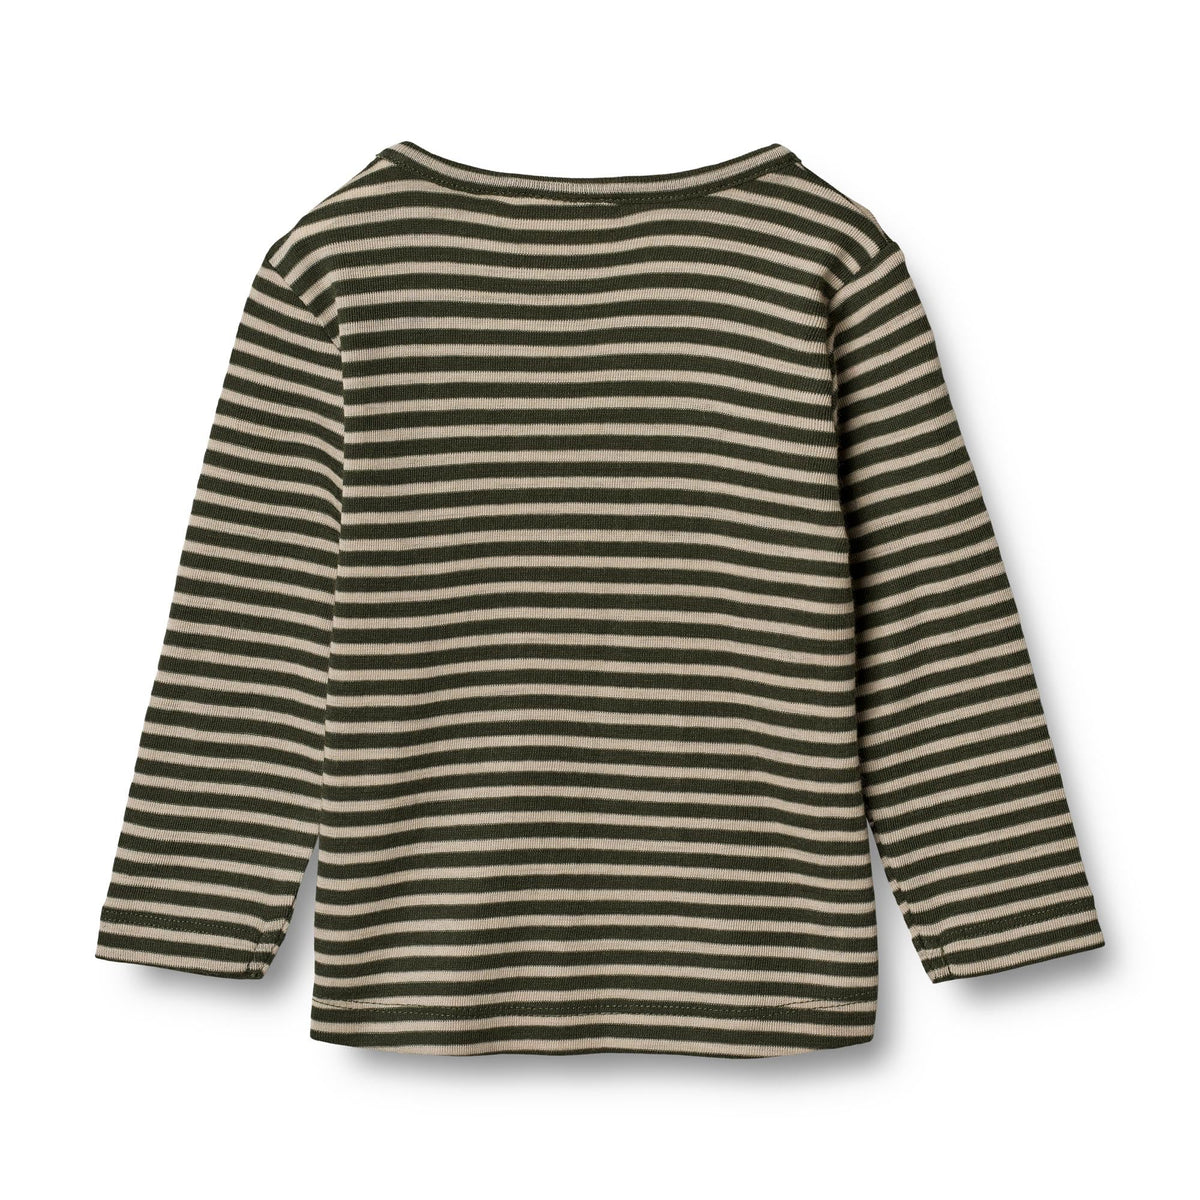 We Wool incredible Wheat Wool have LS of range T-Shirt an